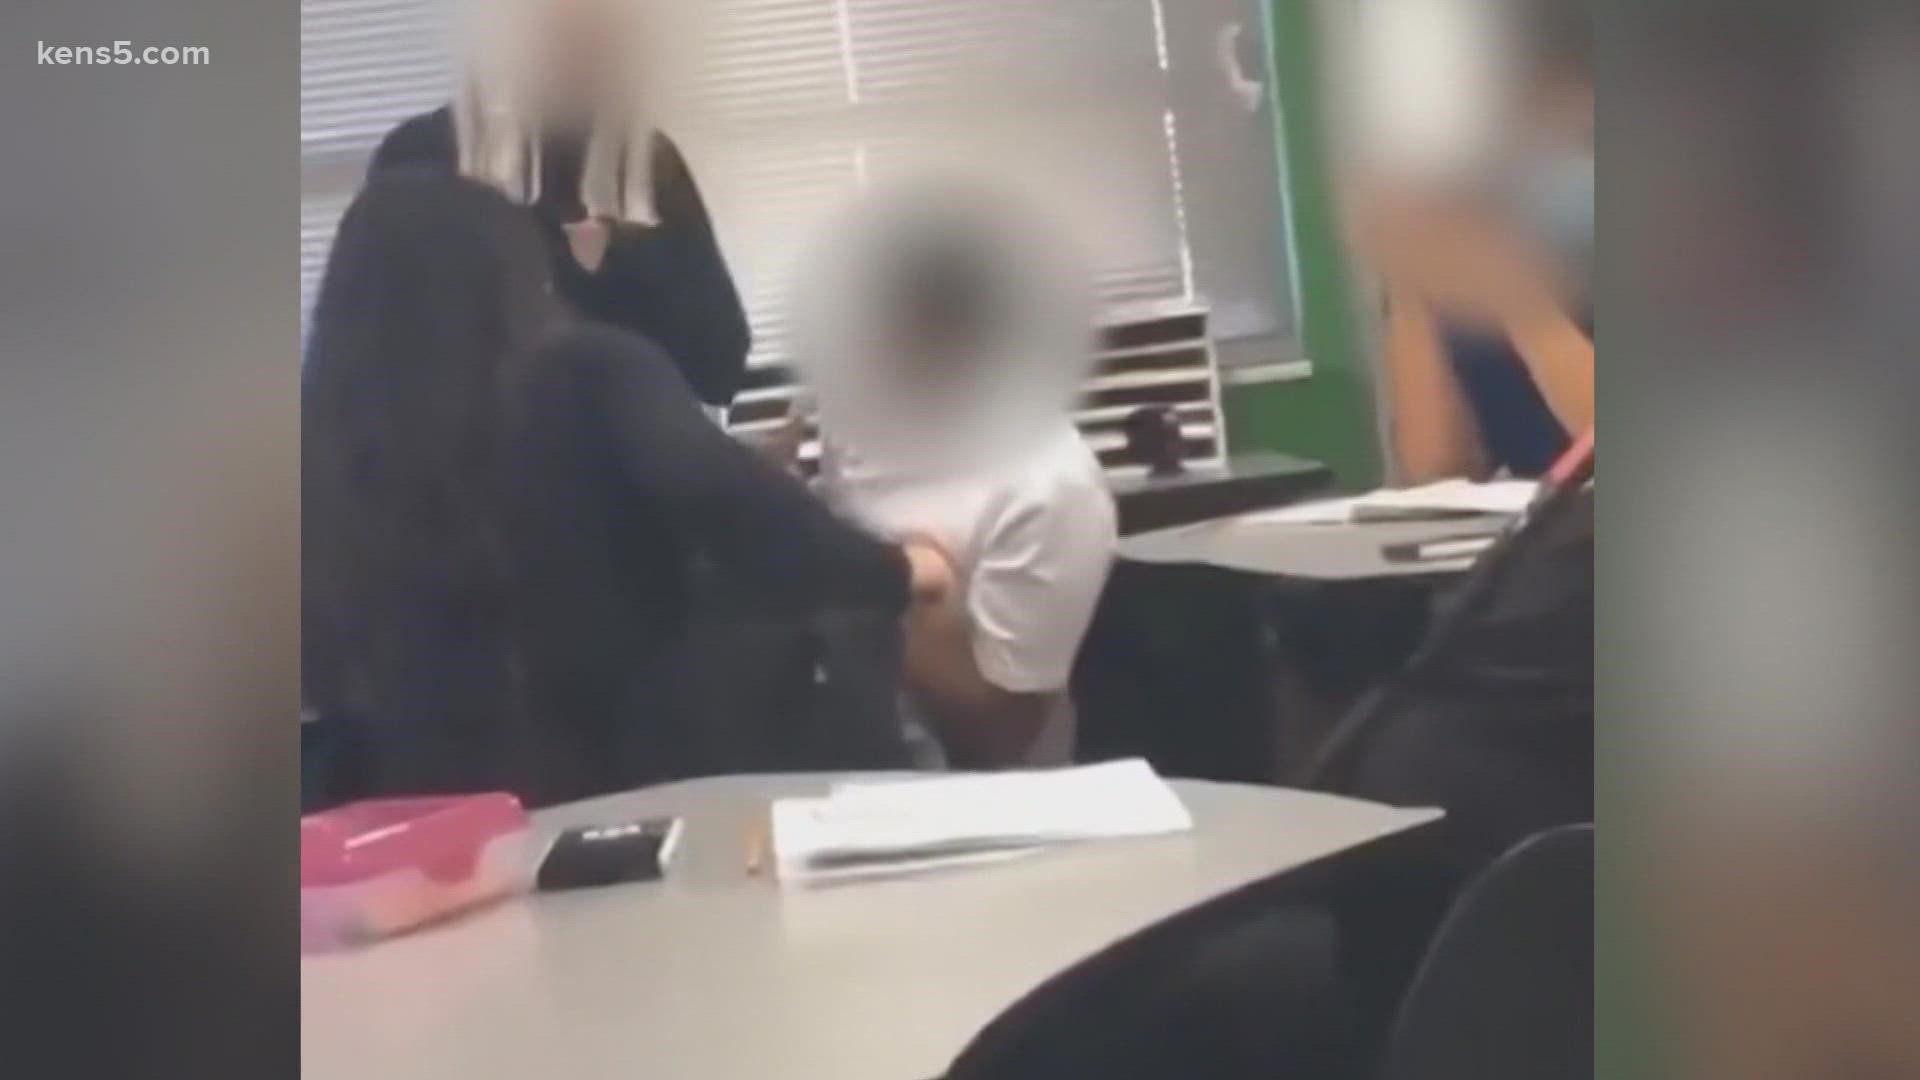 A veteran math teacher's career at the San Antonio Independent School District concluded after a video of her punching a student came to light.